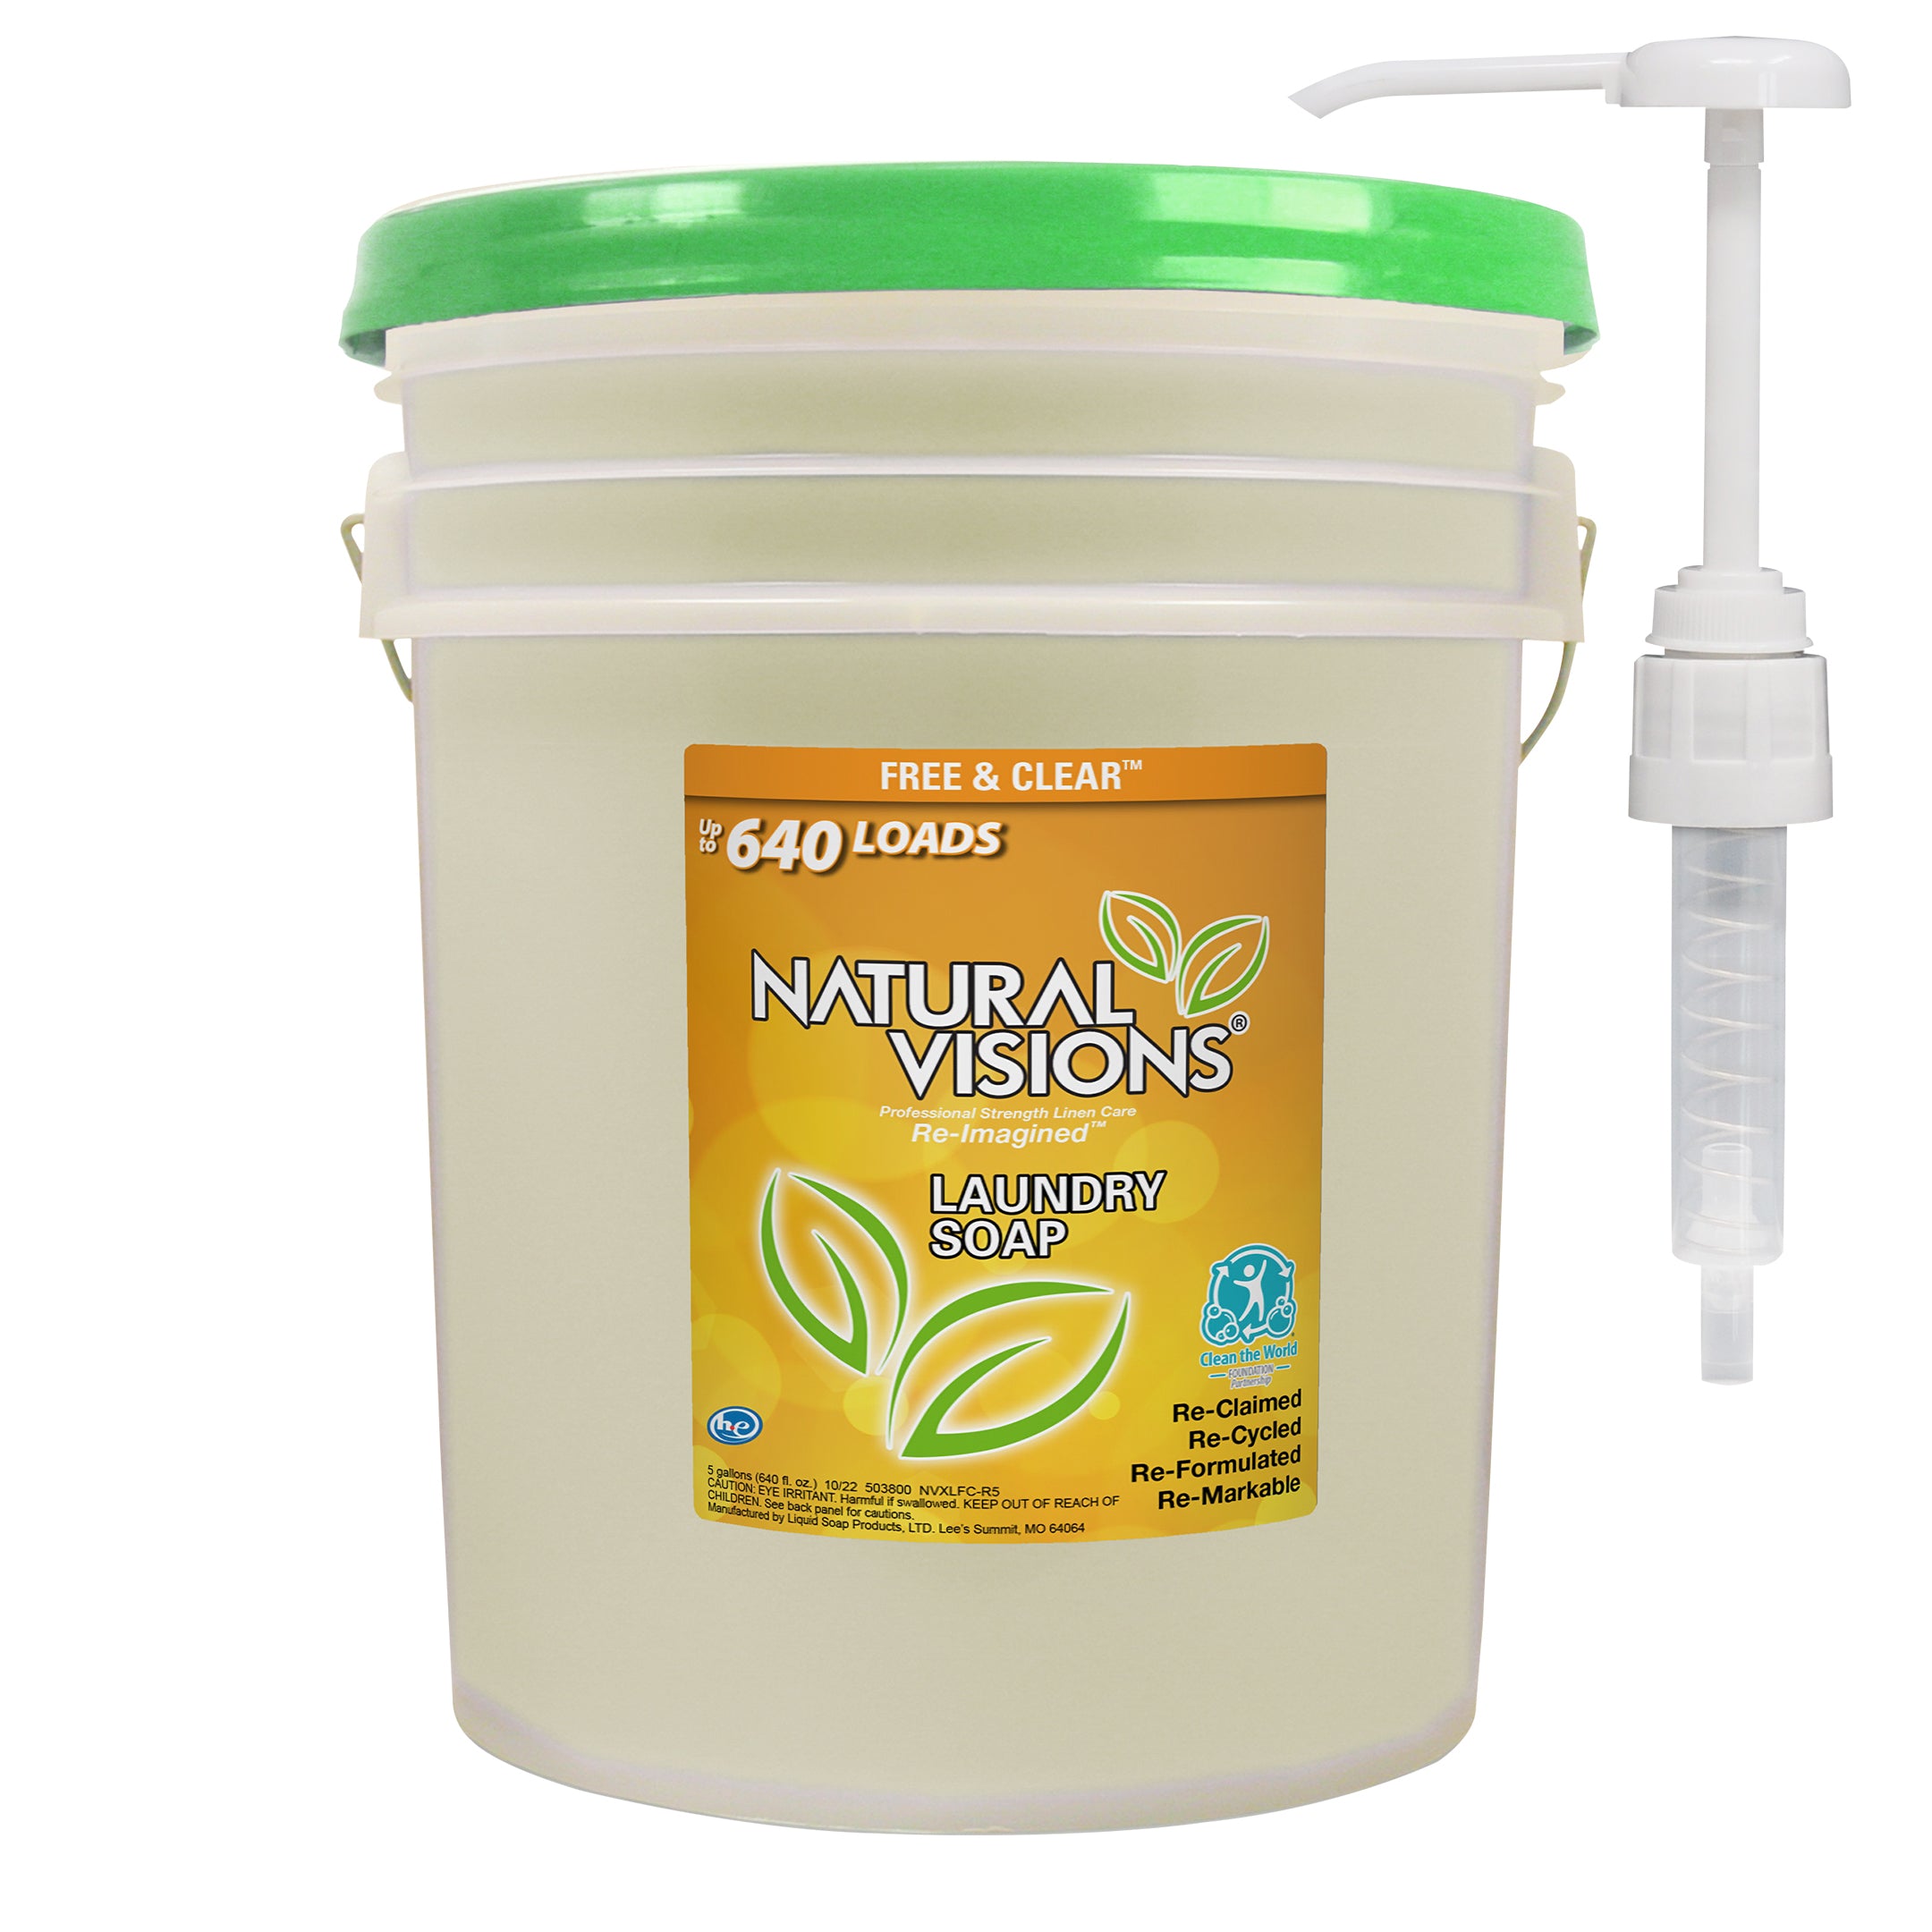 Natural Visions Free & Clear Laundry Soap Bucket - 640oz/1pk